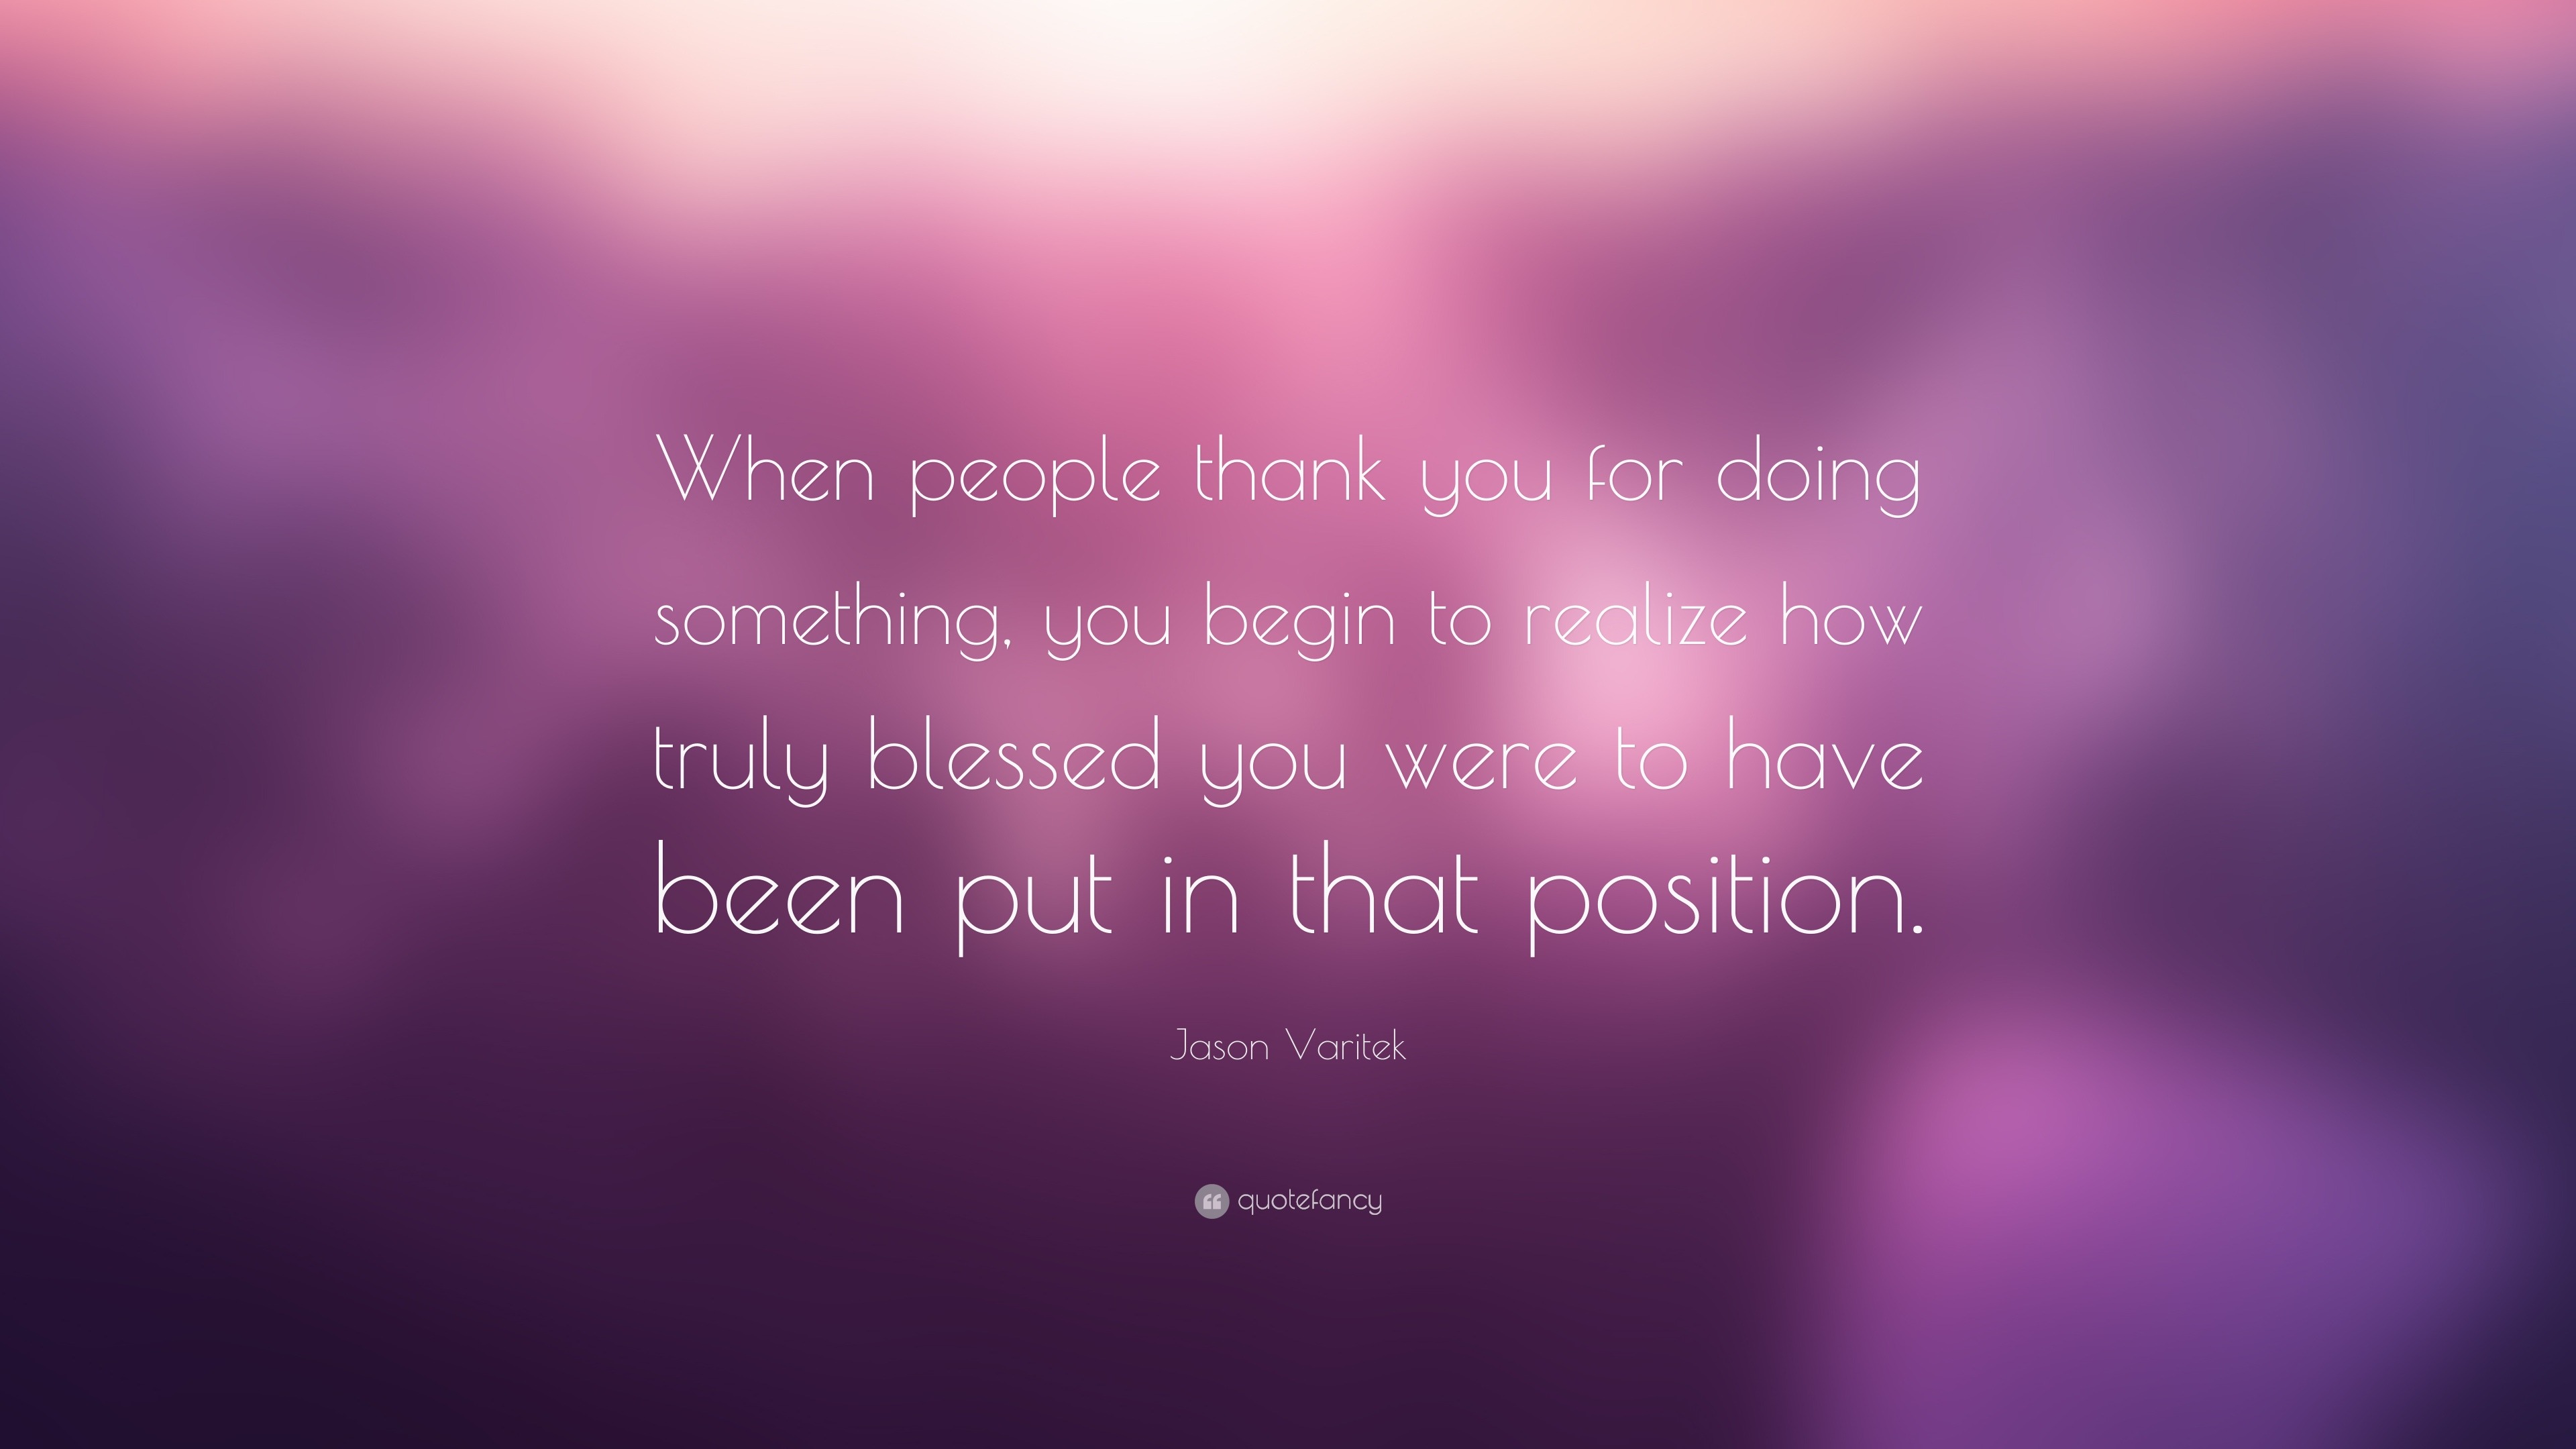 Jason Varitek Quote: “When people thank you for doing something, you begin  to realize how truly blessed you were to have been put in that posi”